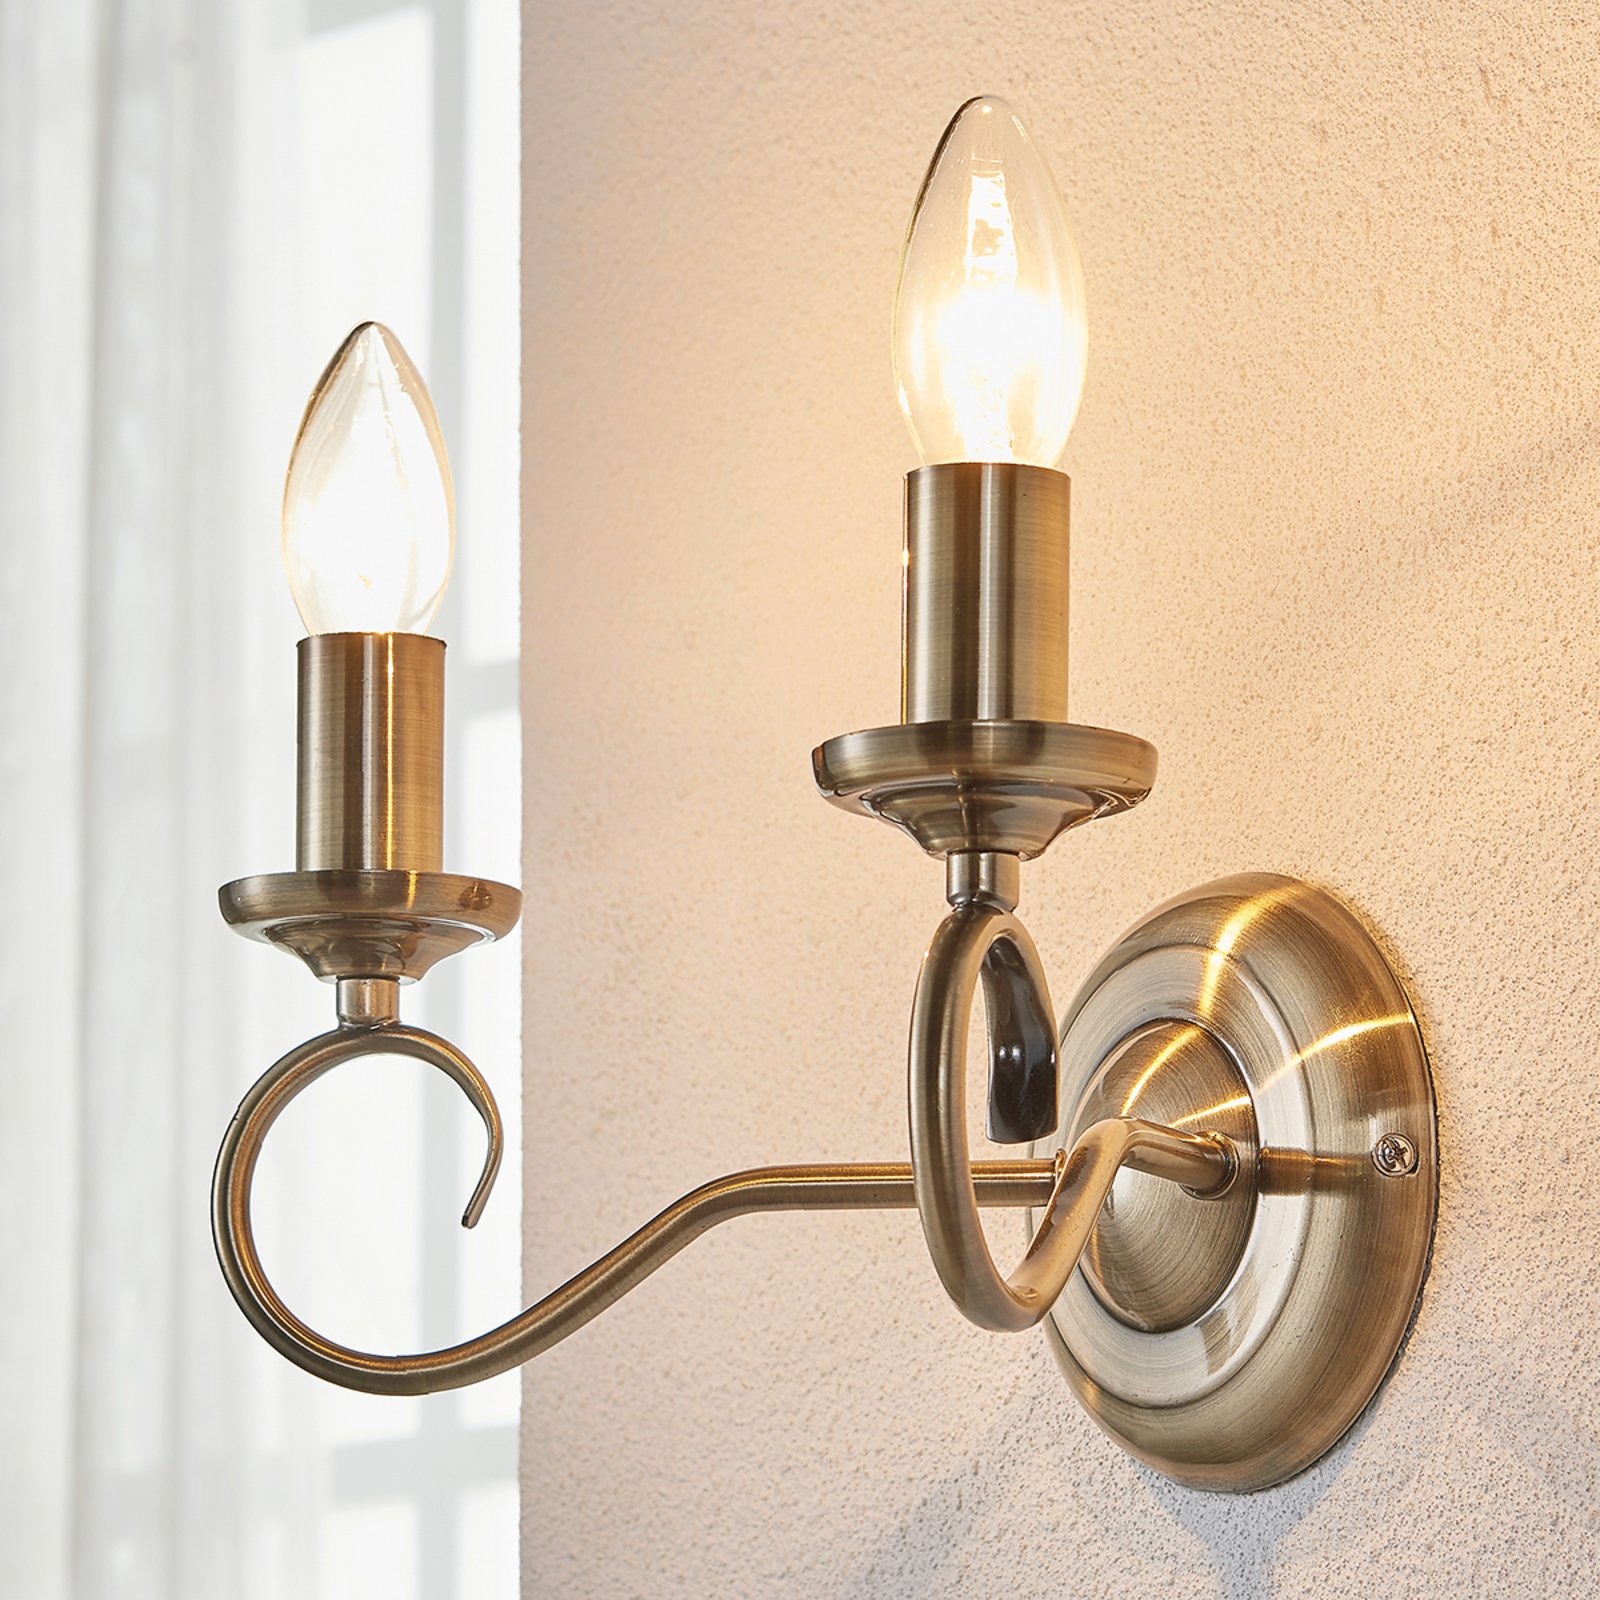 Elegant Marnia wall lamp in antique brass